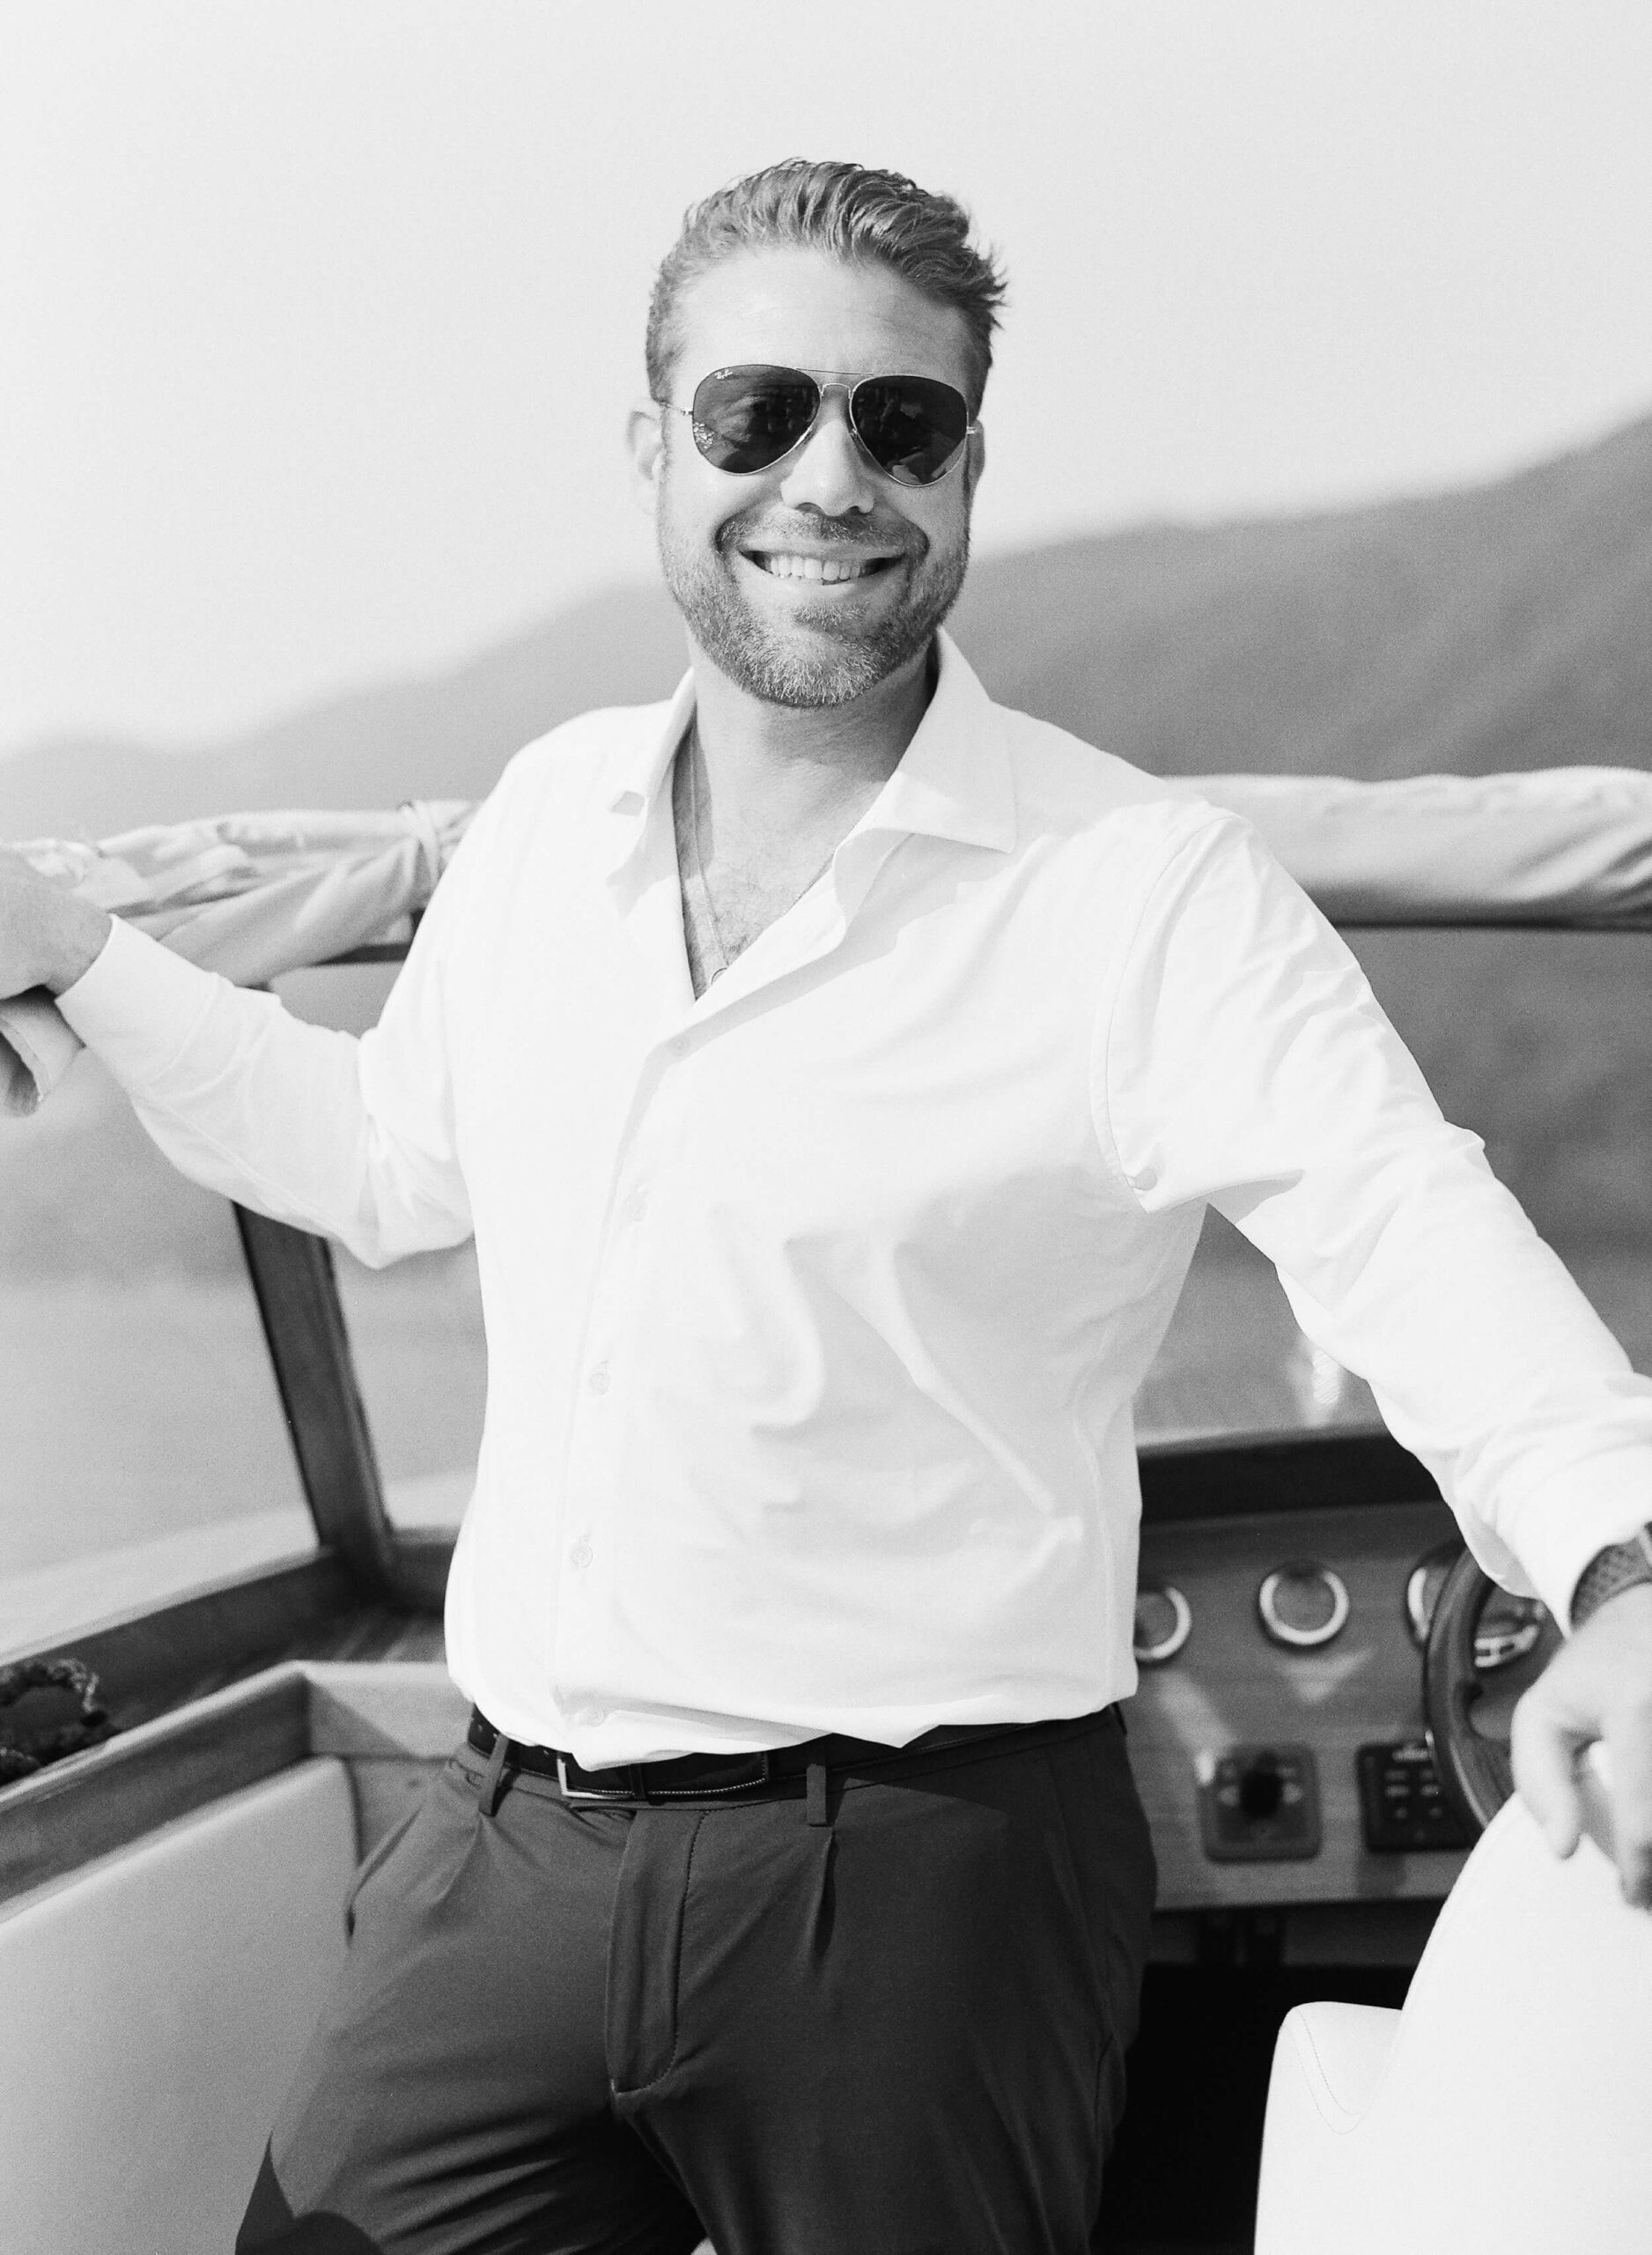 Nick smiling on a boat